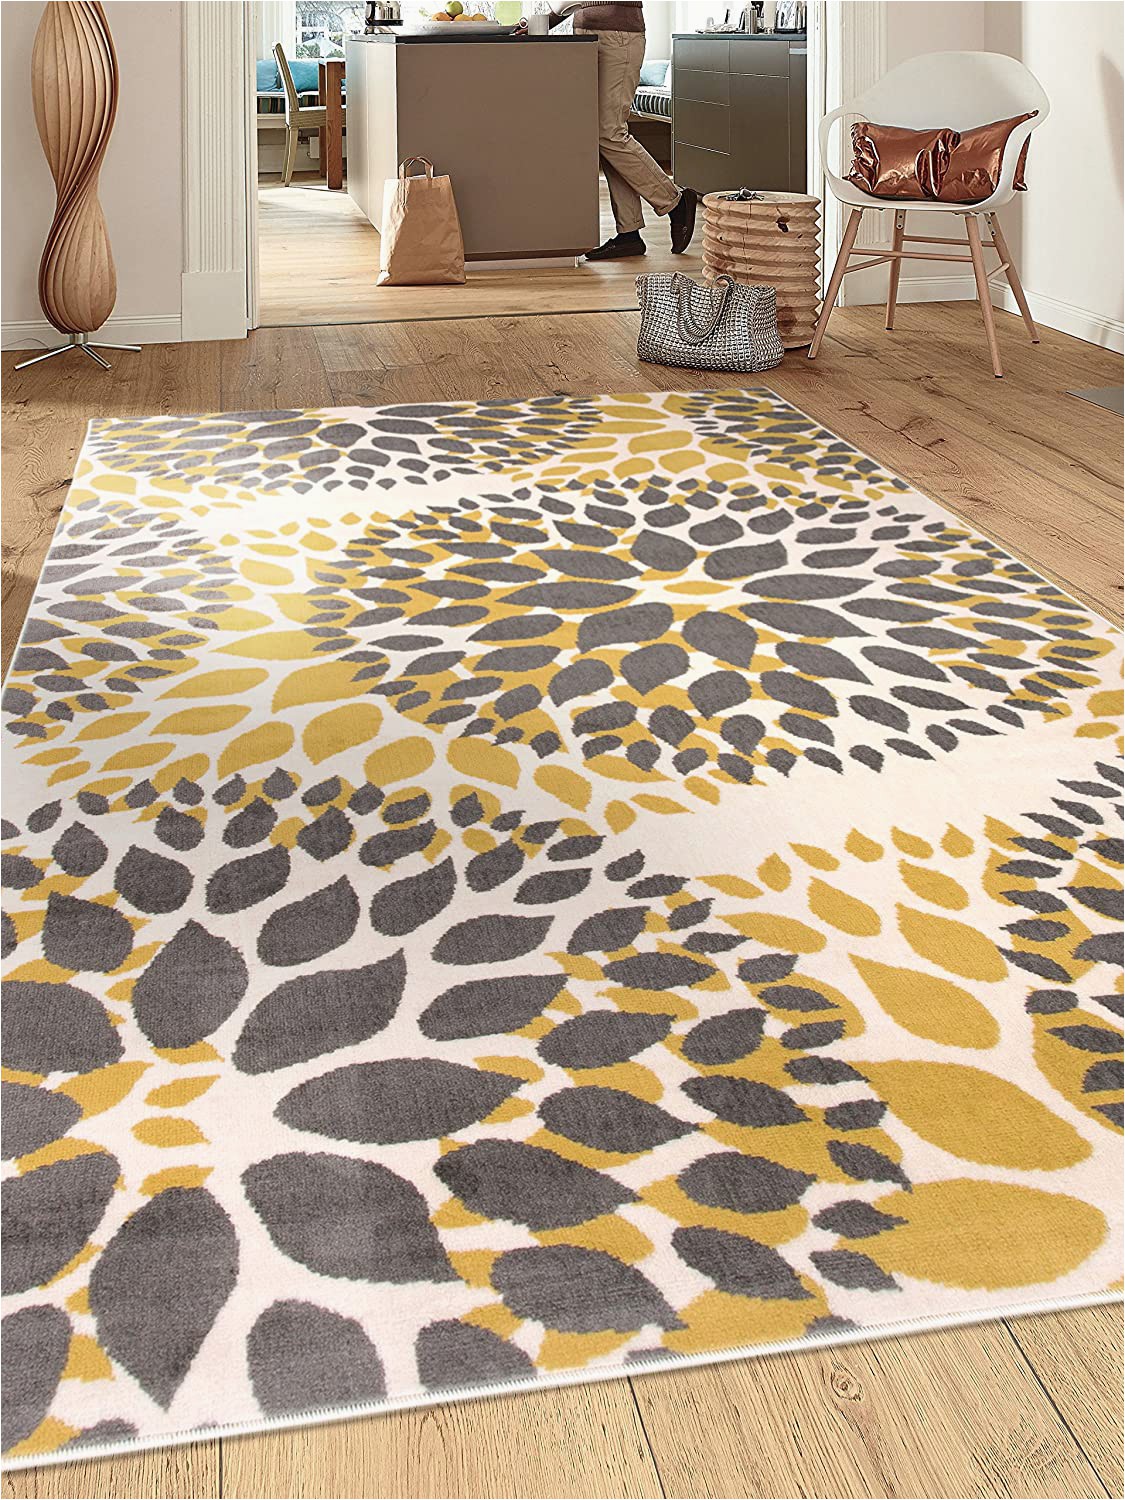 48 X 60 area Rug Modern Floral Circles Design area Rugs 7 6" X 9 5" Yellow